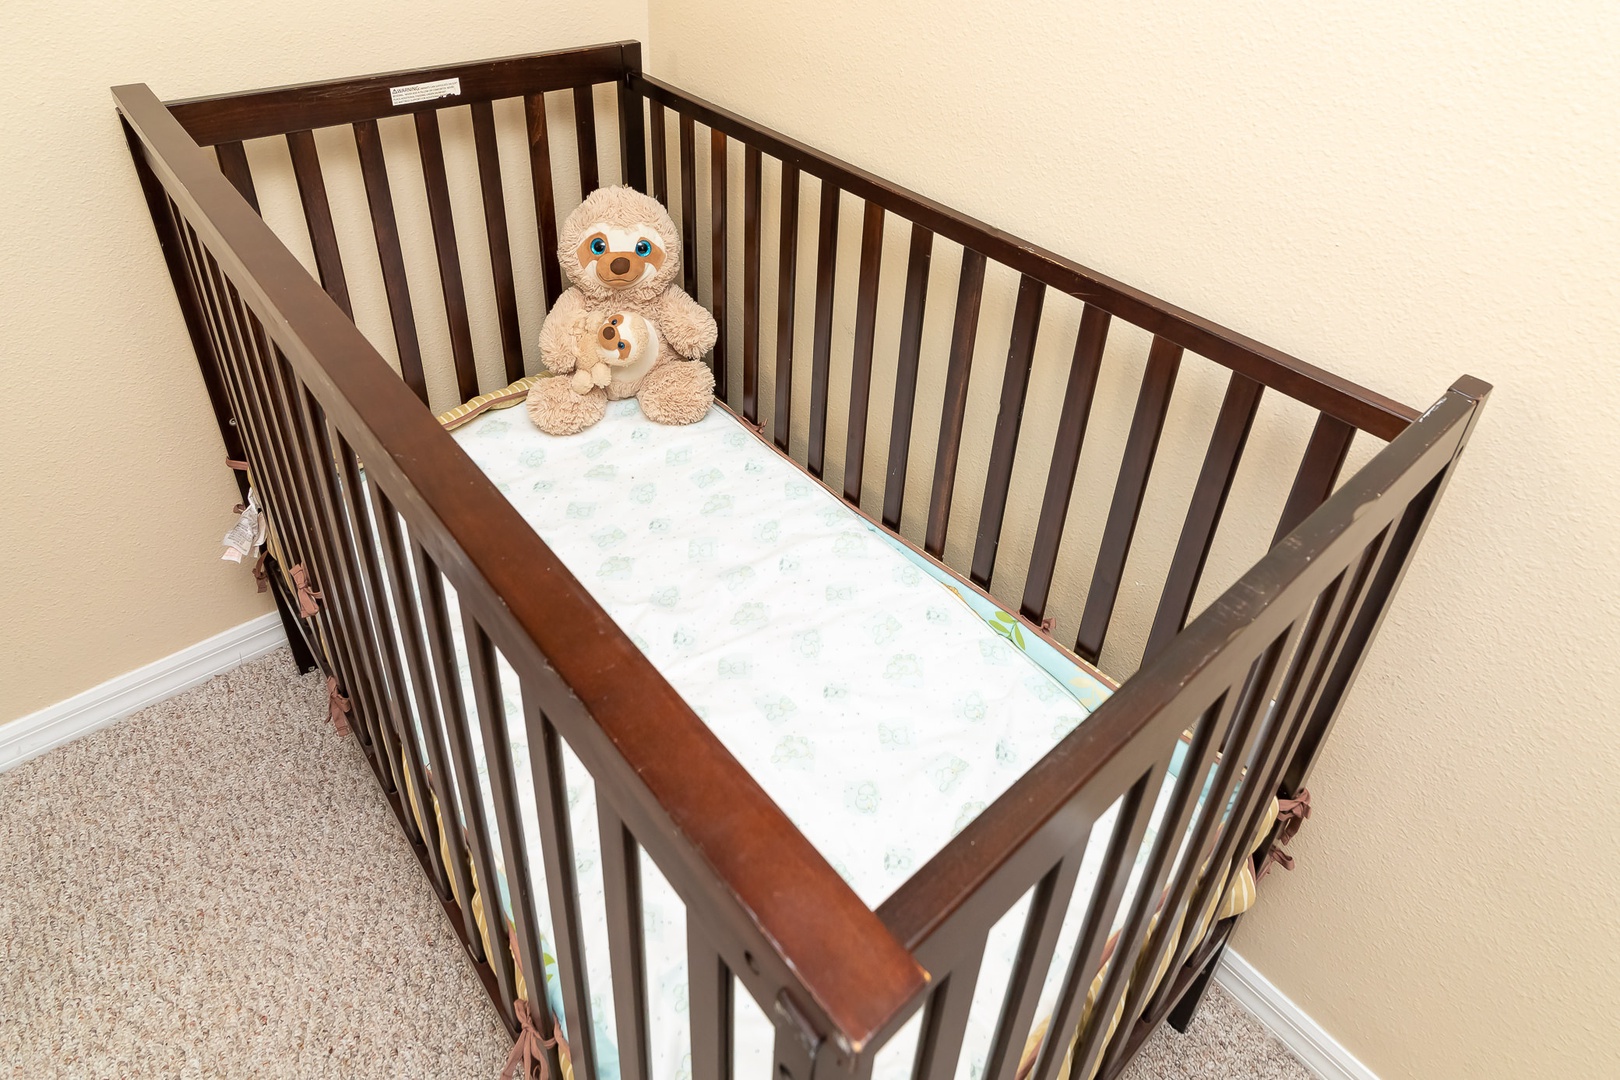 A crib for the little one!